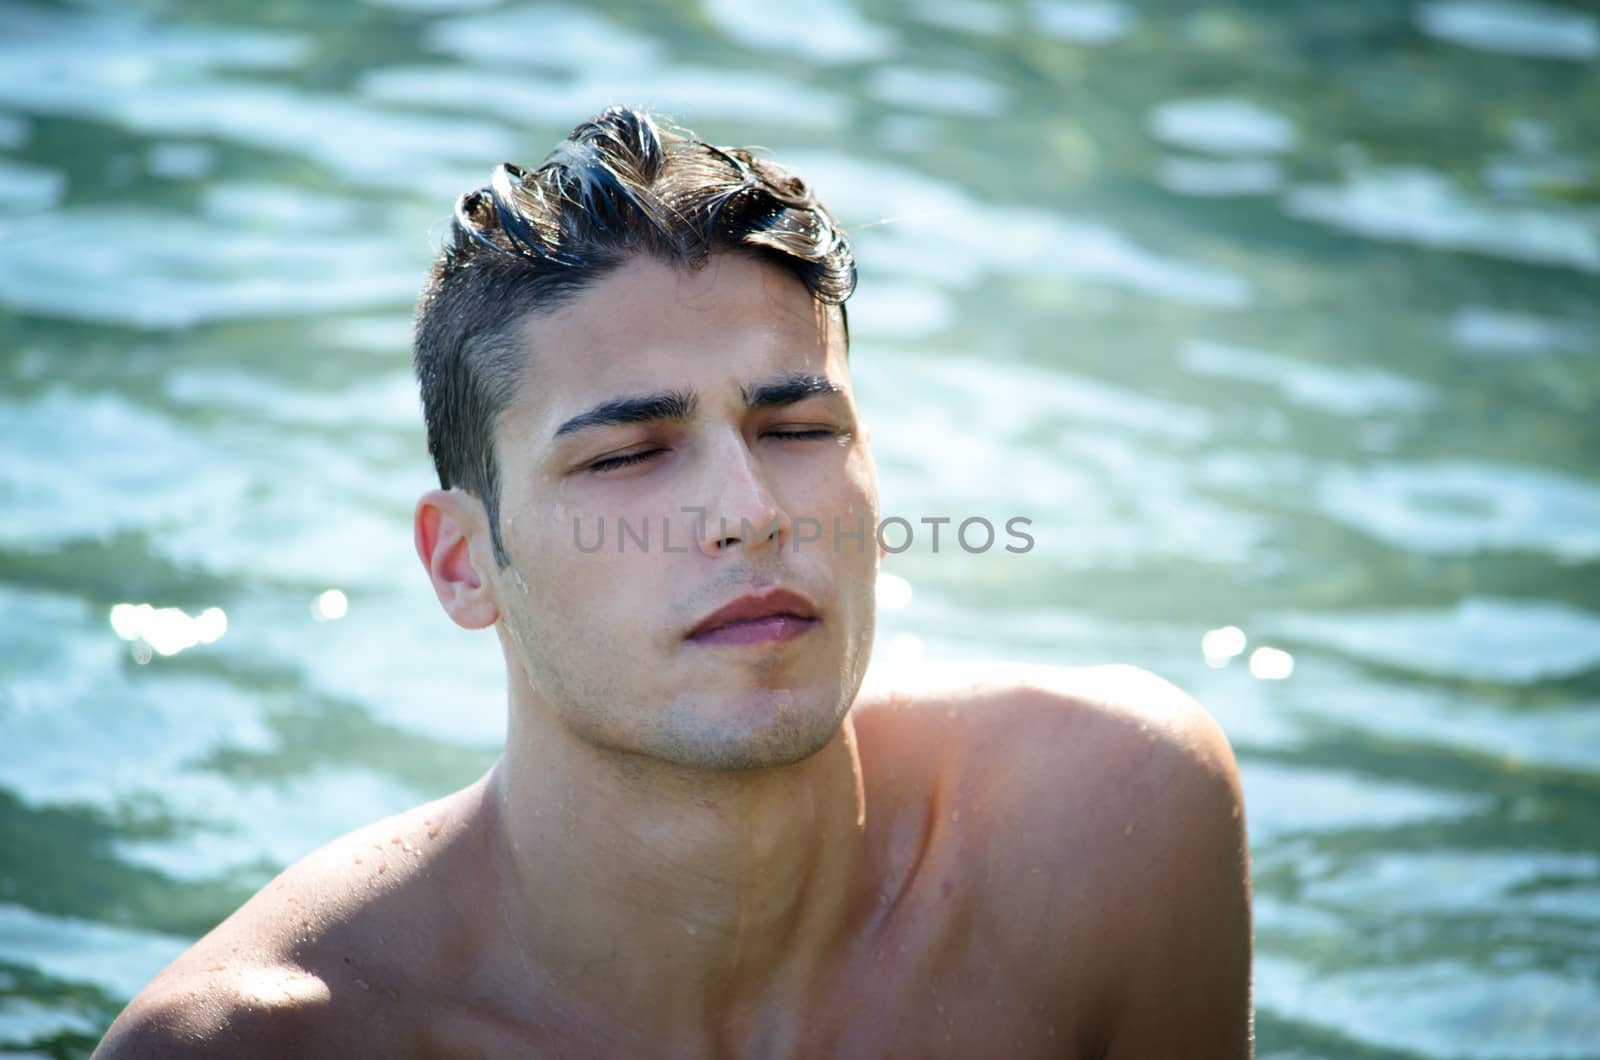 Handsome young man coming out of water with wet hair, eyes closed